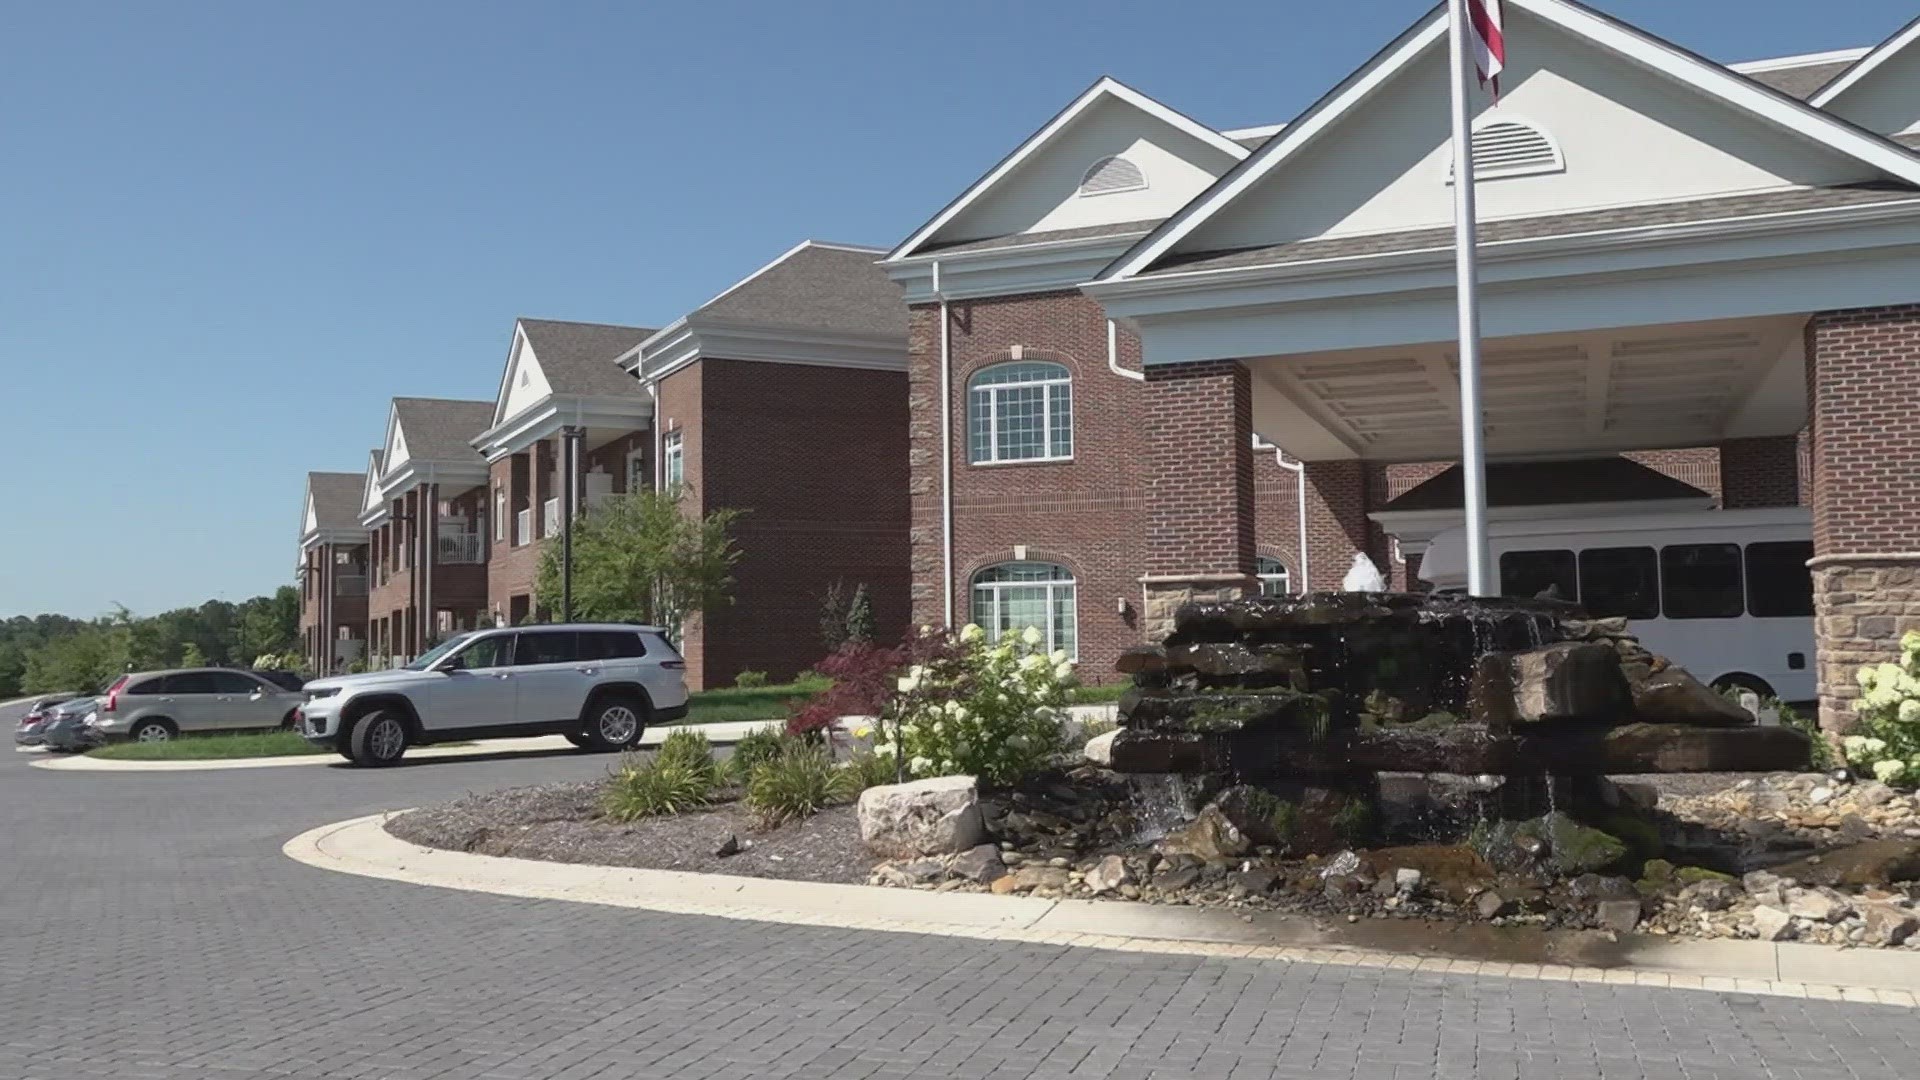 The CEO of Presbyterian Homes of Tennessee said the company has been losing money for years.